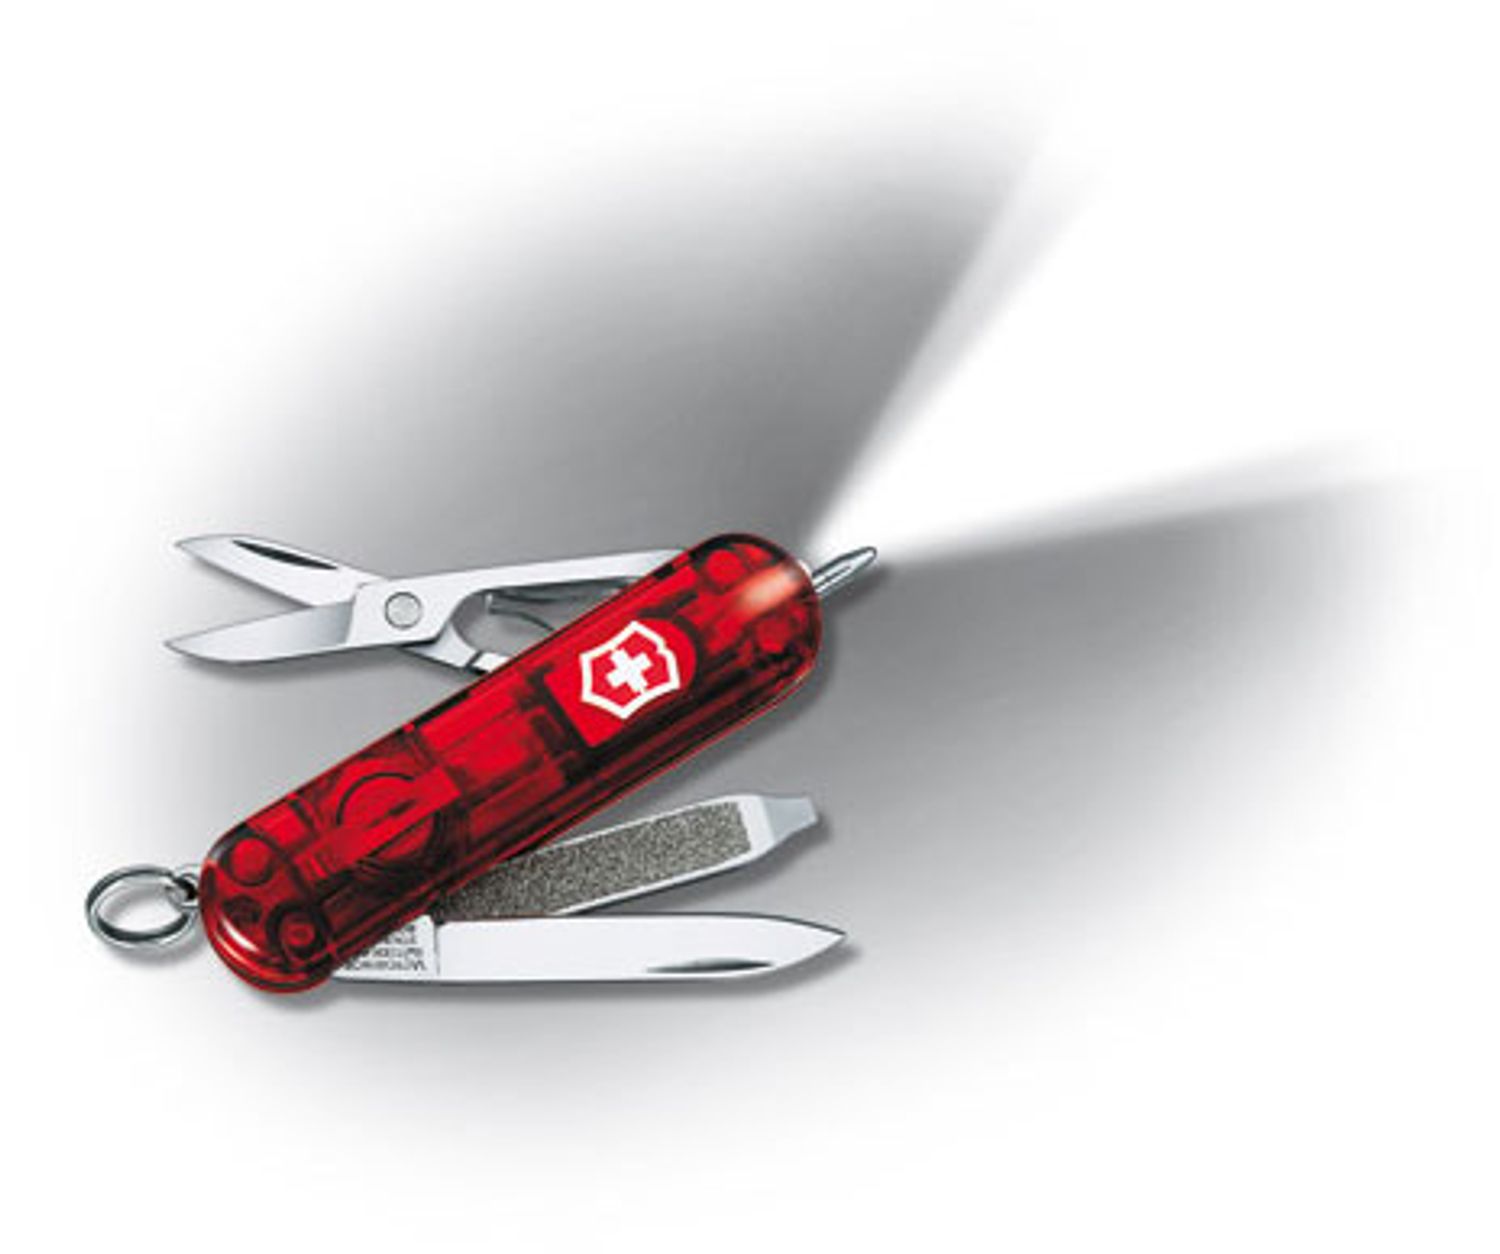 POCKET KNIFE PEN WITH FILE AND SCISSORS